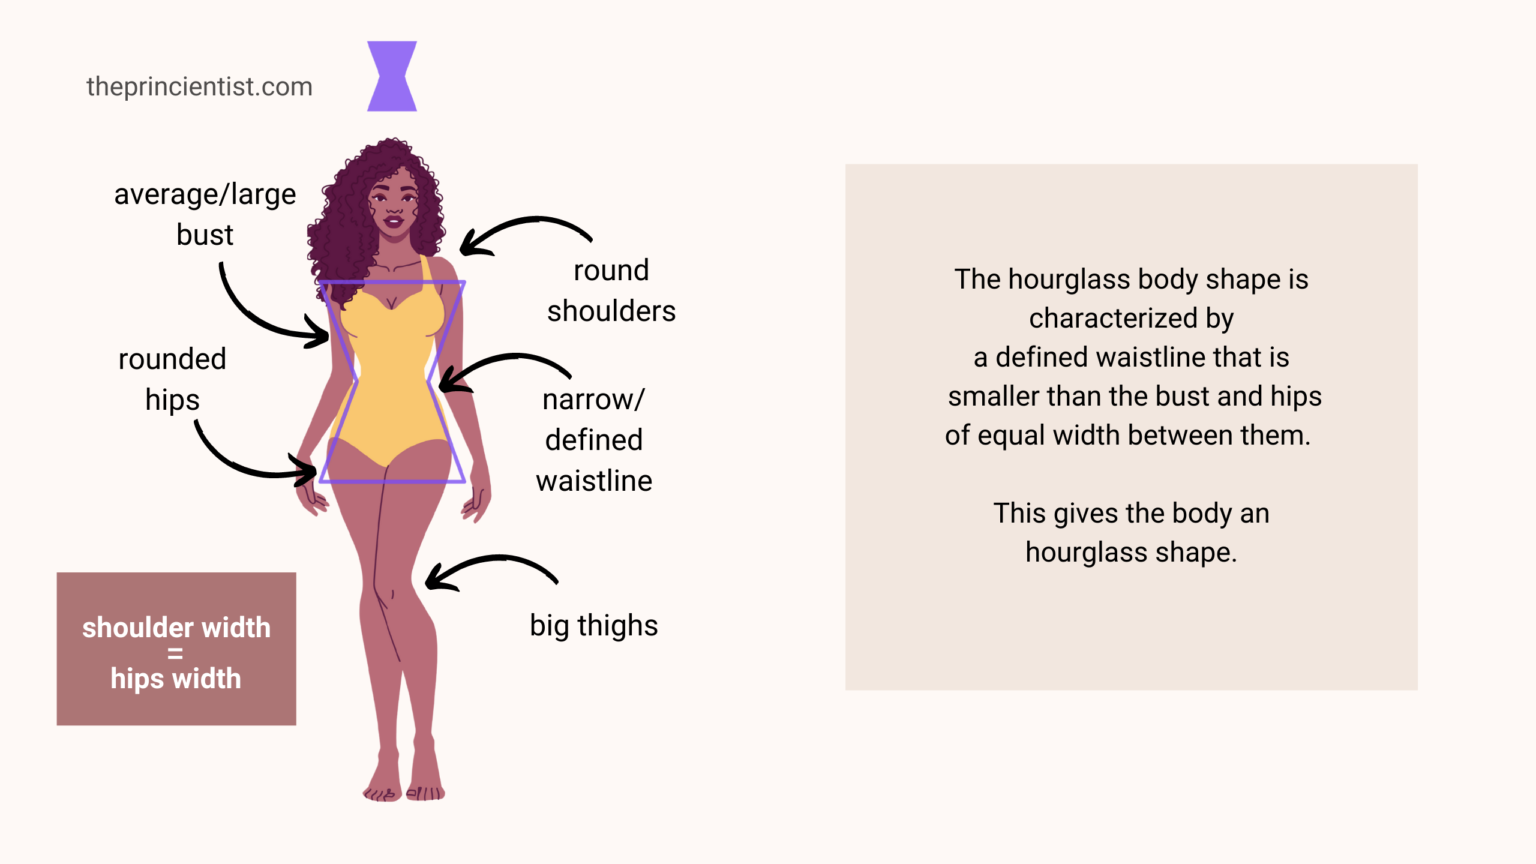 How to get an hourglass figure and a smaller waist in 4 steps (Do this) 